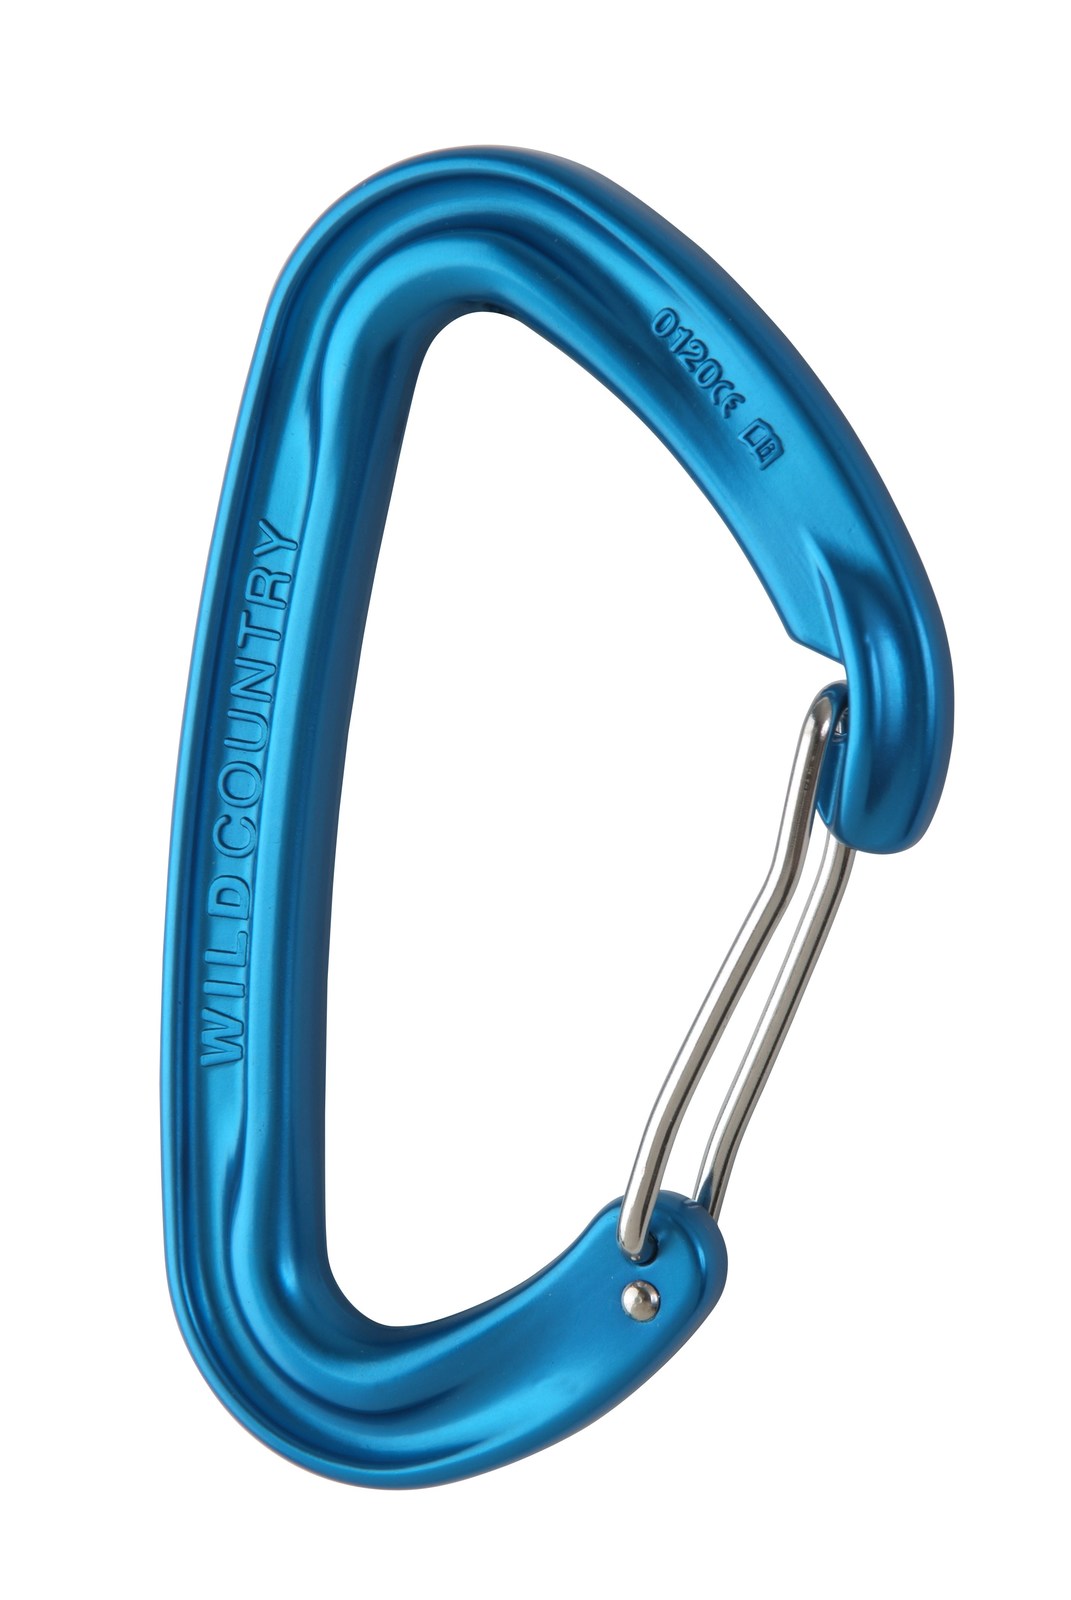 Wild Country Wildwire Carabiner - Blue